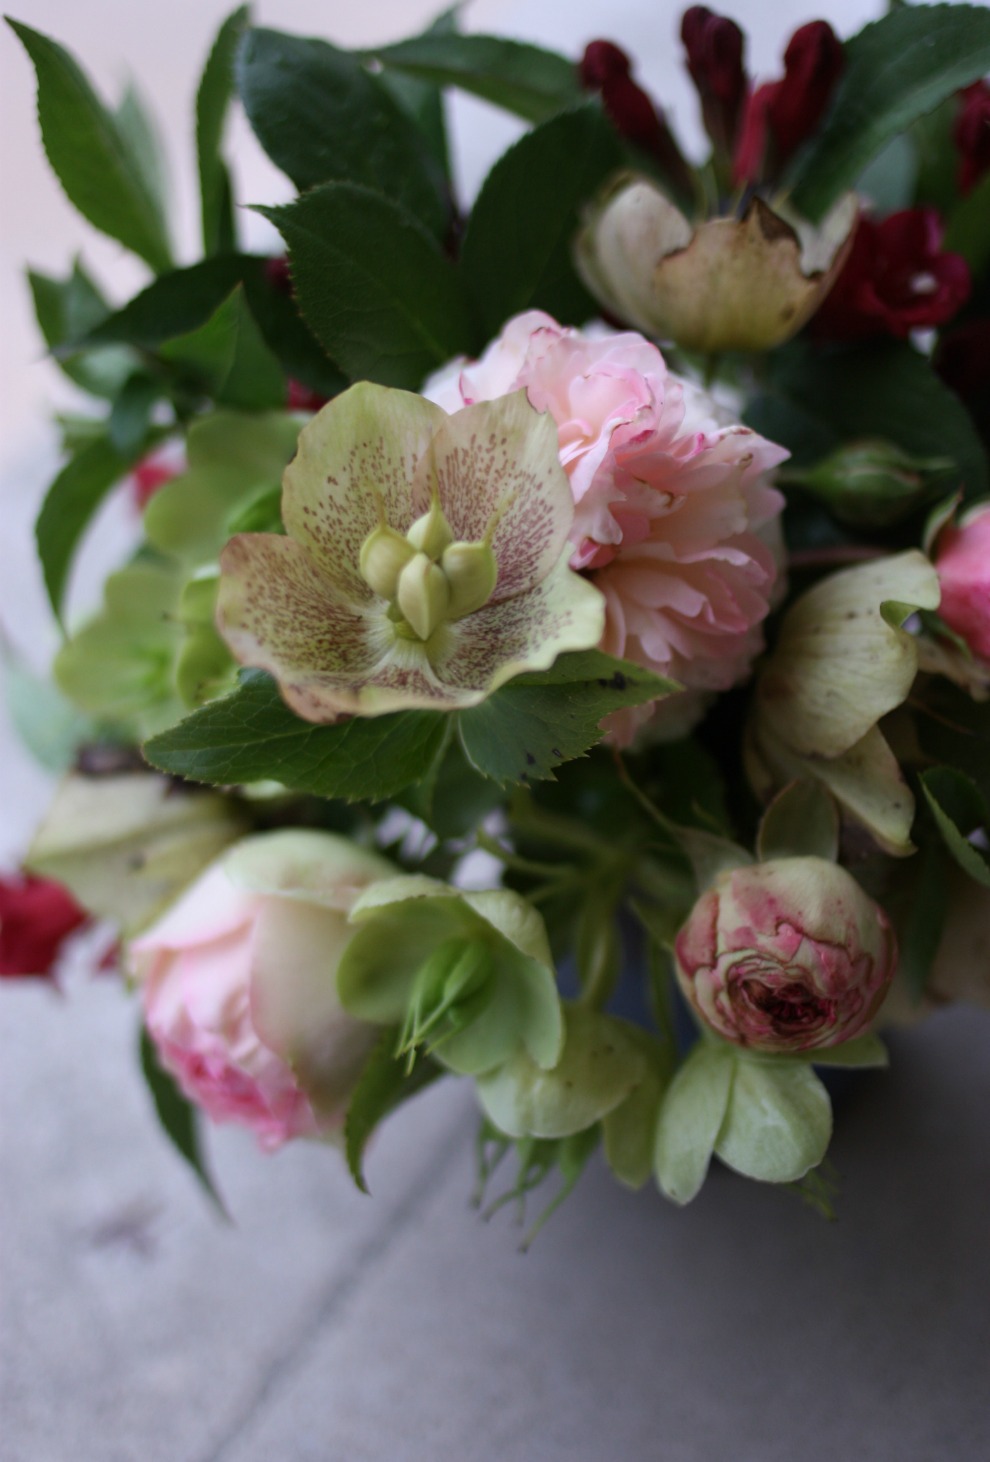 roses and hellebores from above